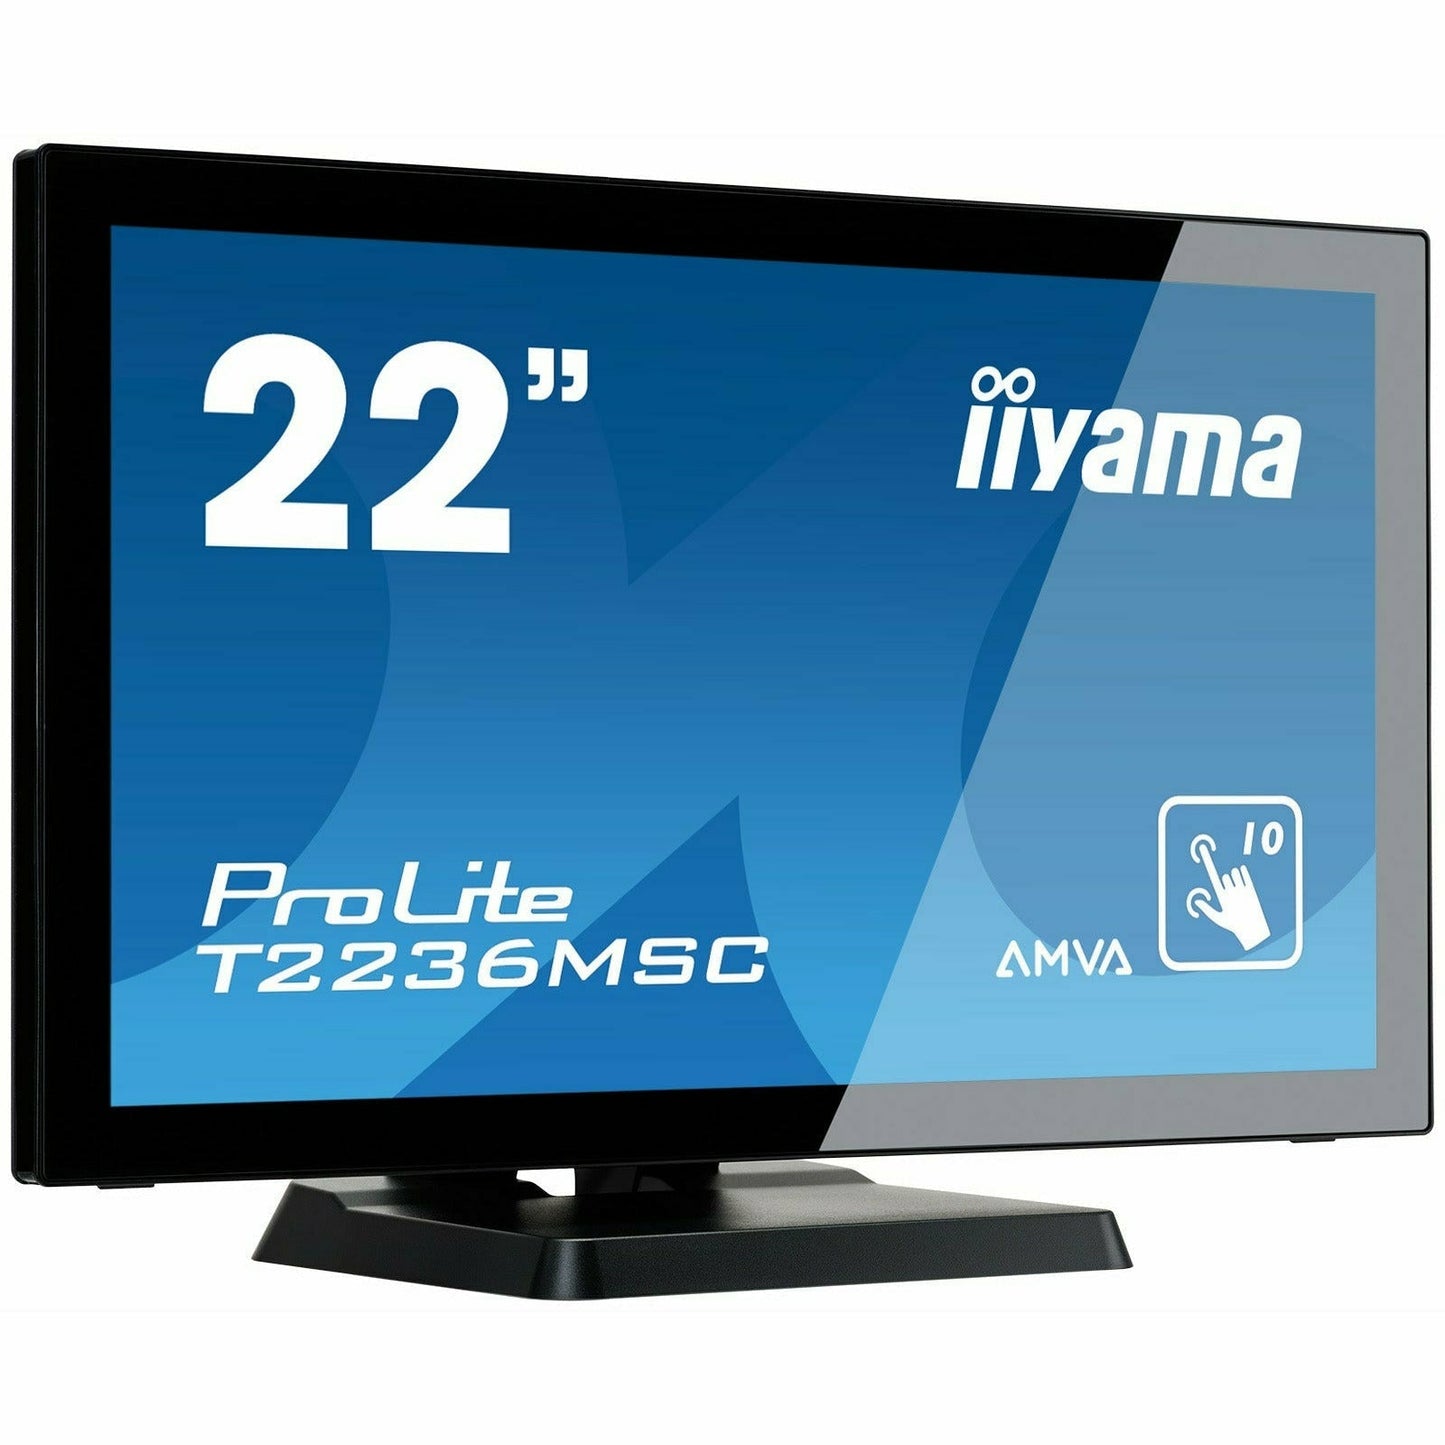 Steel Blue iiyama ProLite T2236MSC-B2 22" 10 point Touch Screen with edge-to-edge glass and AMVA panel